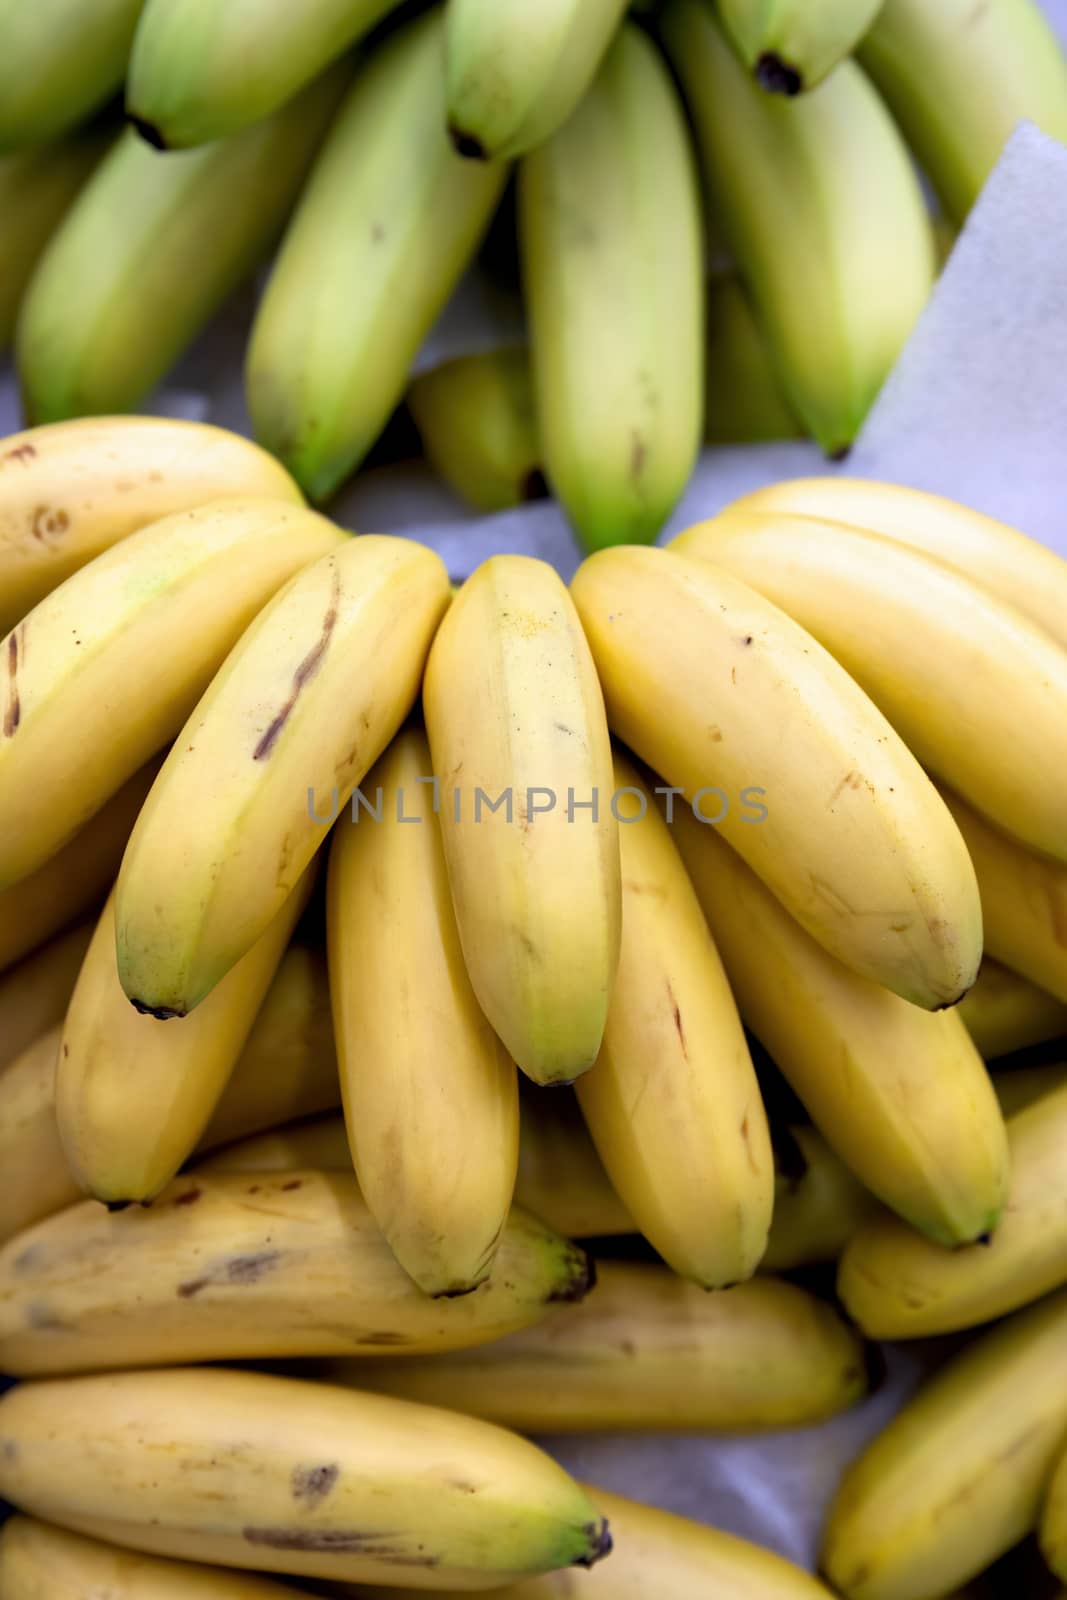 Bunch of bananas on boxes in supermarket by bonilook